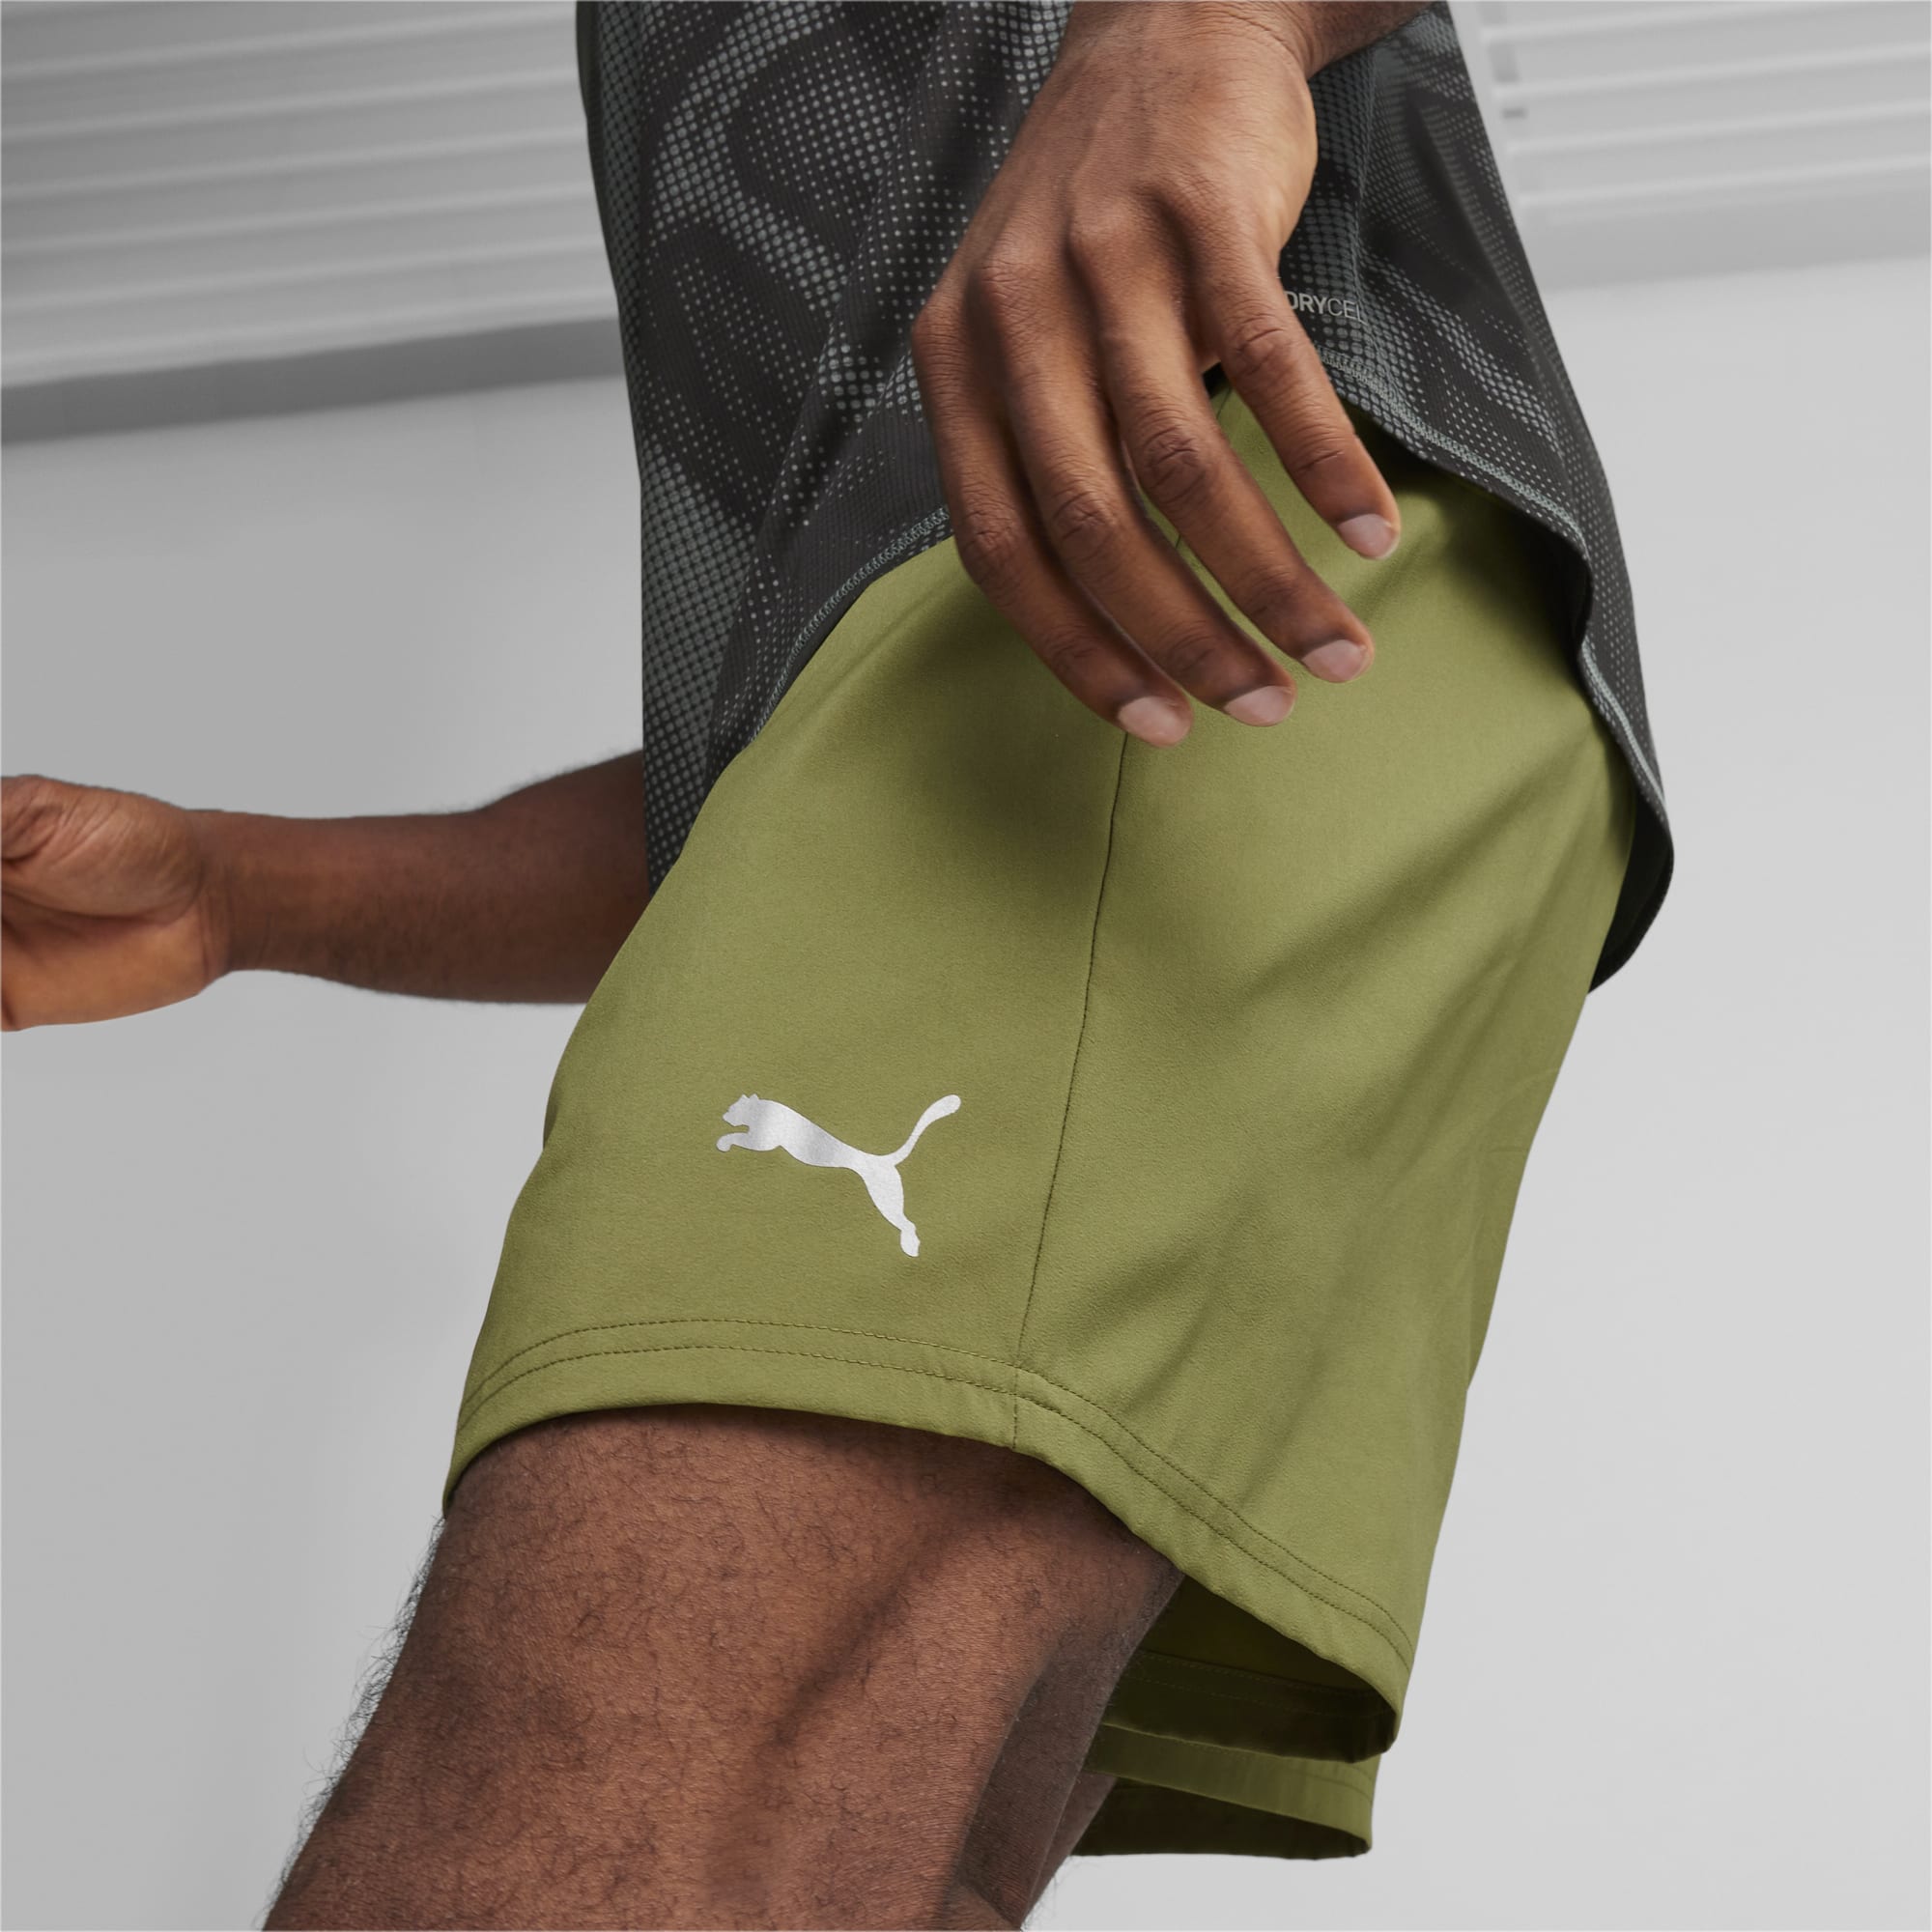 PUMA Favourite 2-in-1 Men's Running Shorts, Olive Green, Size M, Clothing